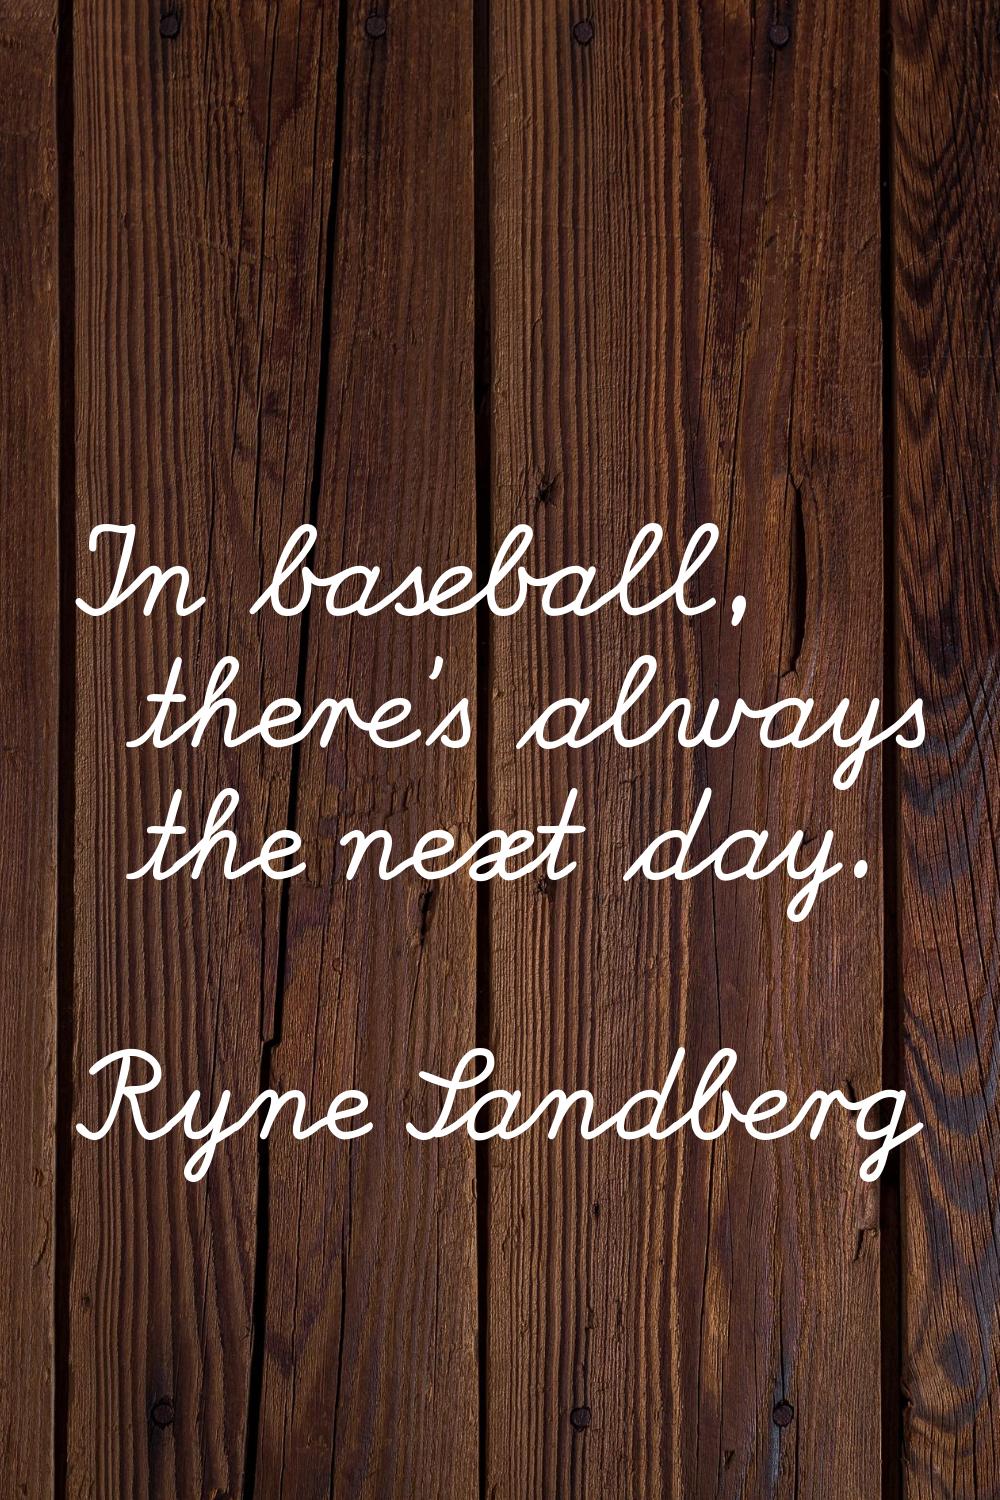 In baseball, there's always the next day.